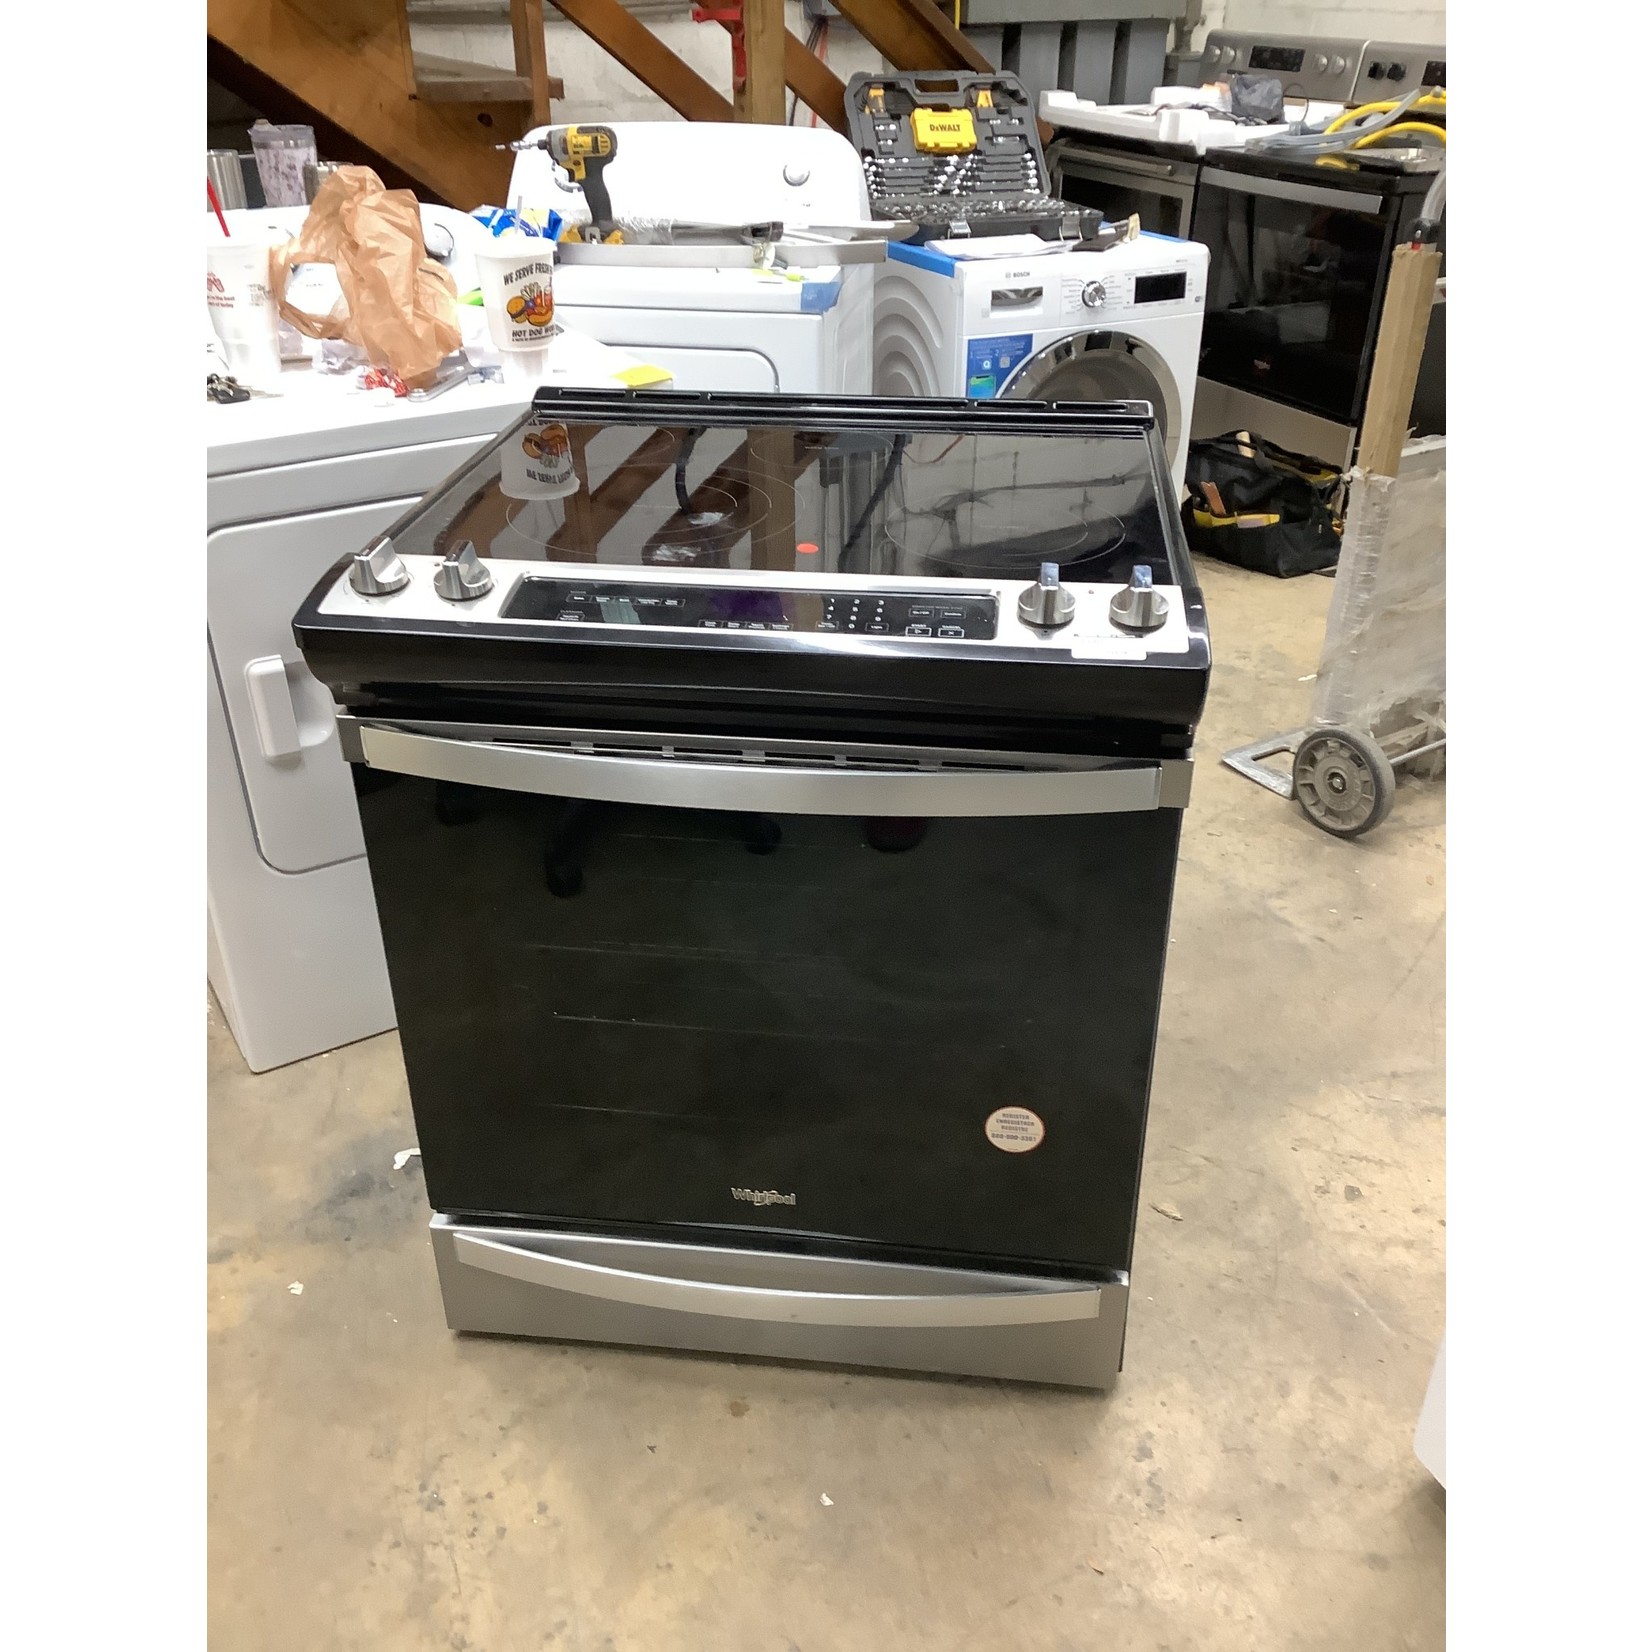 Whirlpool 6.4 CU.FT. WHIRLPOOL ELECTRIC 7 IN 1 AIR FRY OVEN